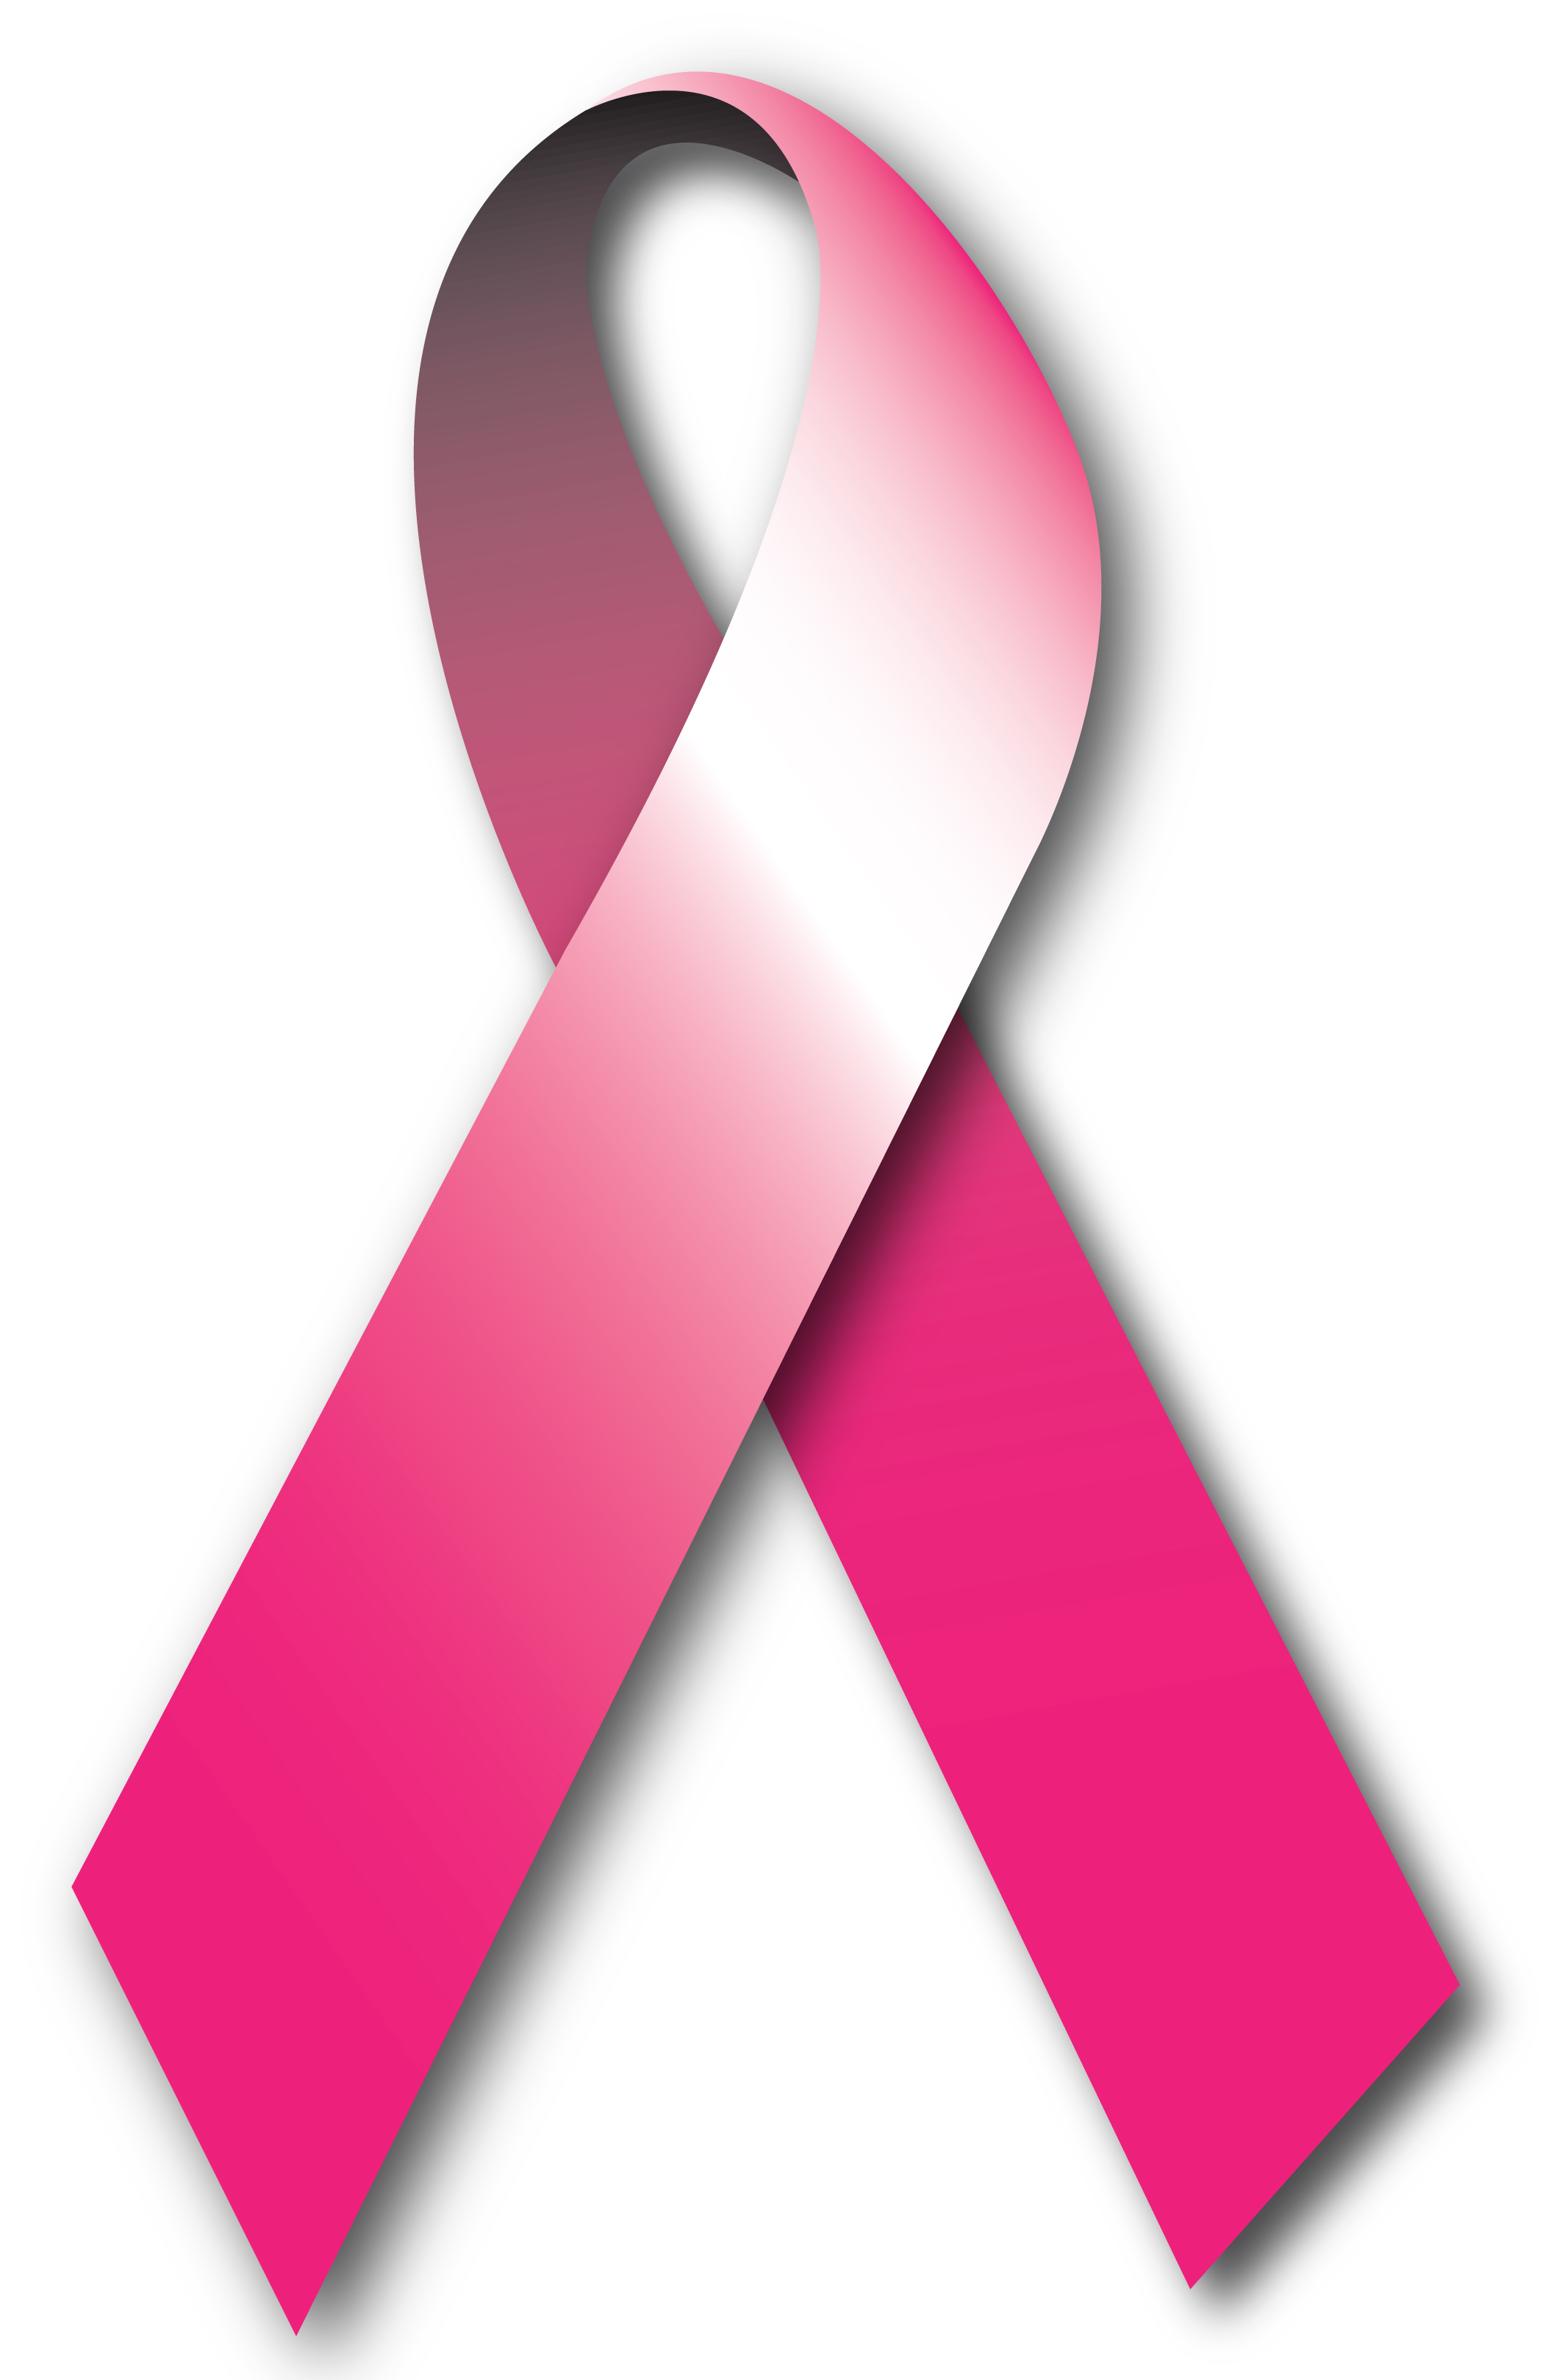 Centra Care, Albertville Outlets Thinking Pink this Month ...